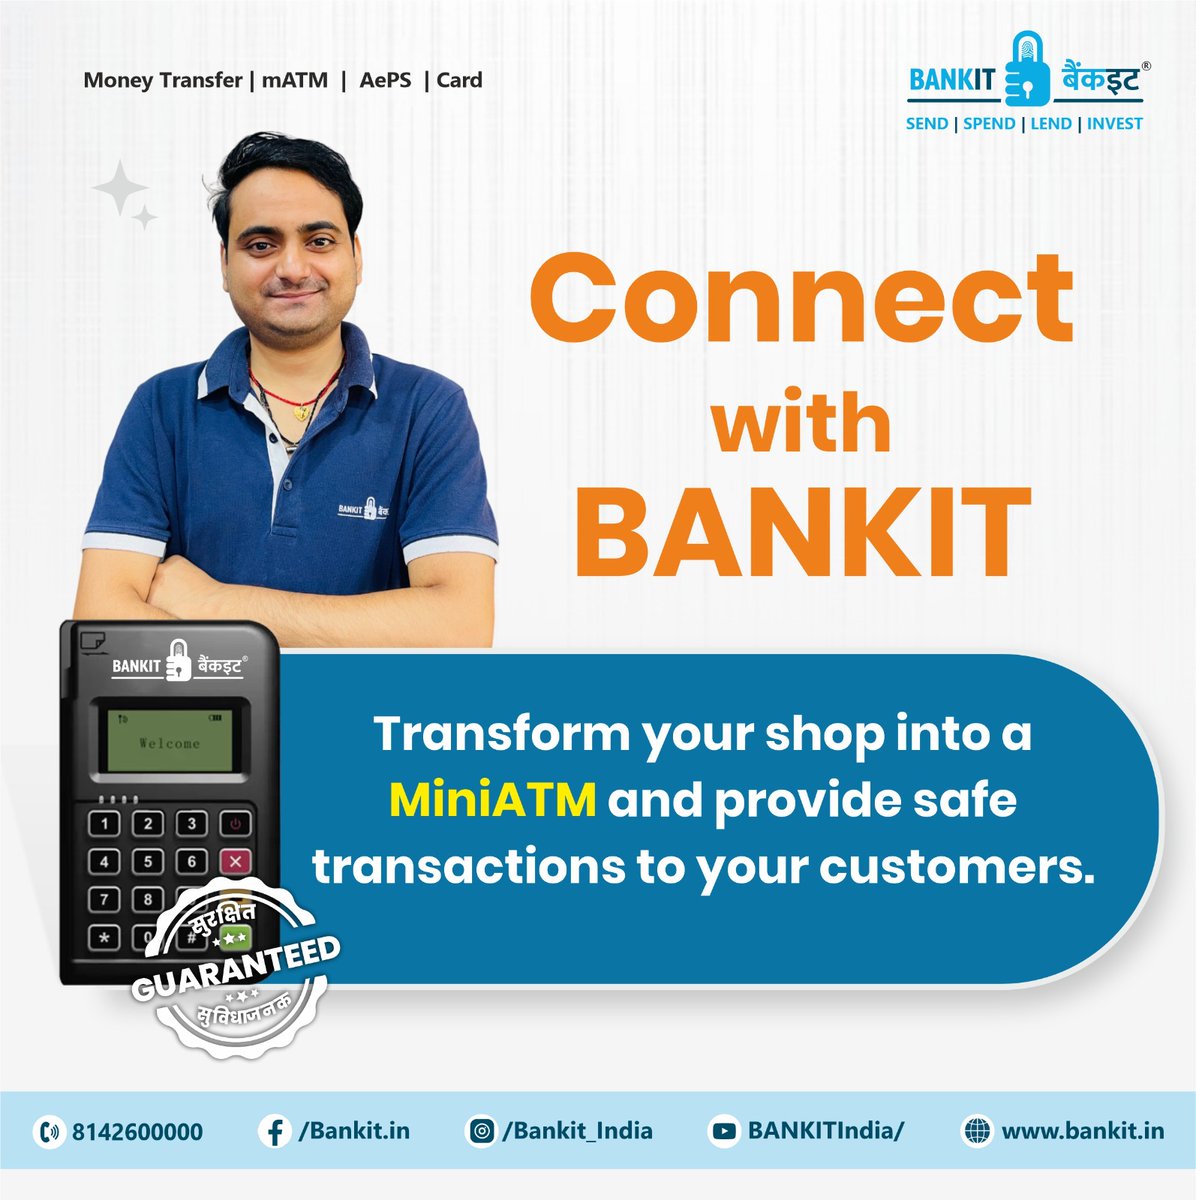 Connect with BANKIT and elevate your business in the digital age to reach new heights of success! Turn your shop into a mini ATM, providing safe and easy transactions for your customers. #DigitalTransformation #FintechInnovation #SmallBusinessSuccess #DigitalPayments